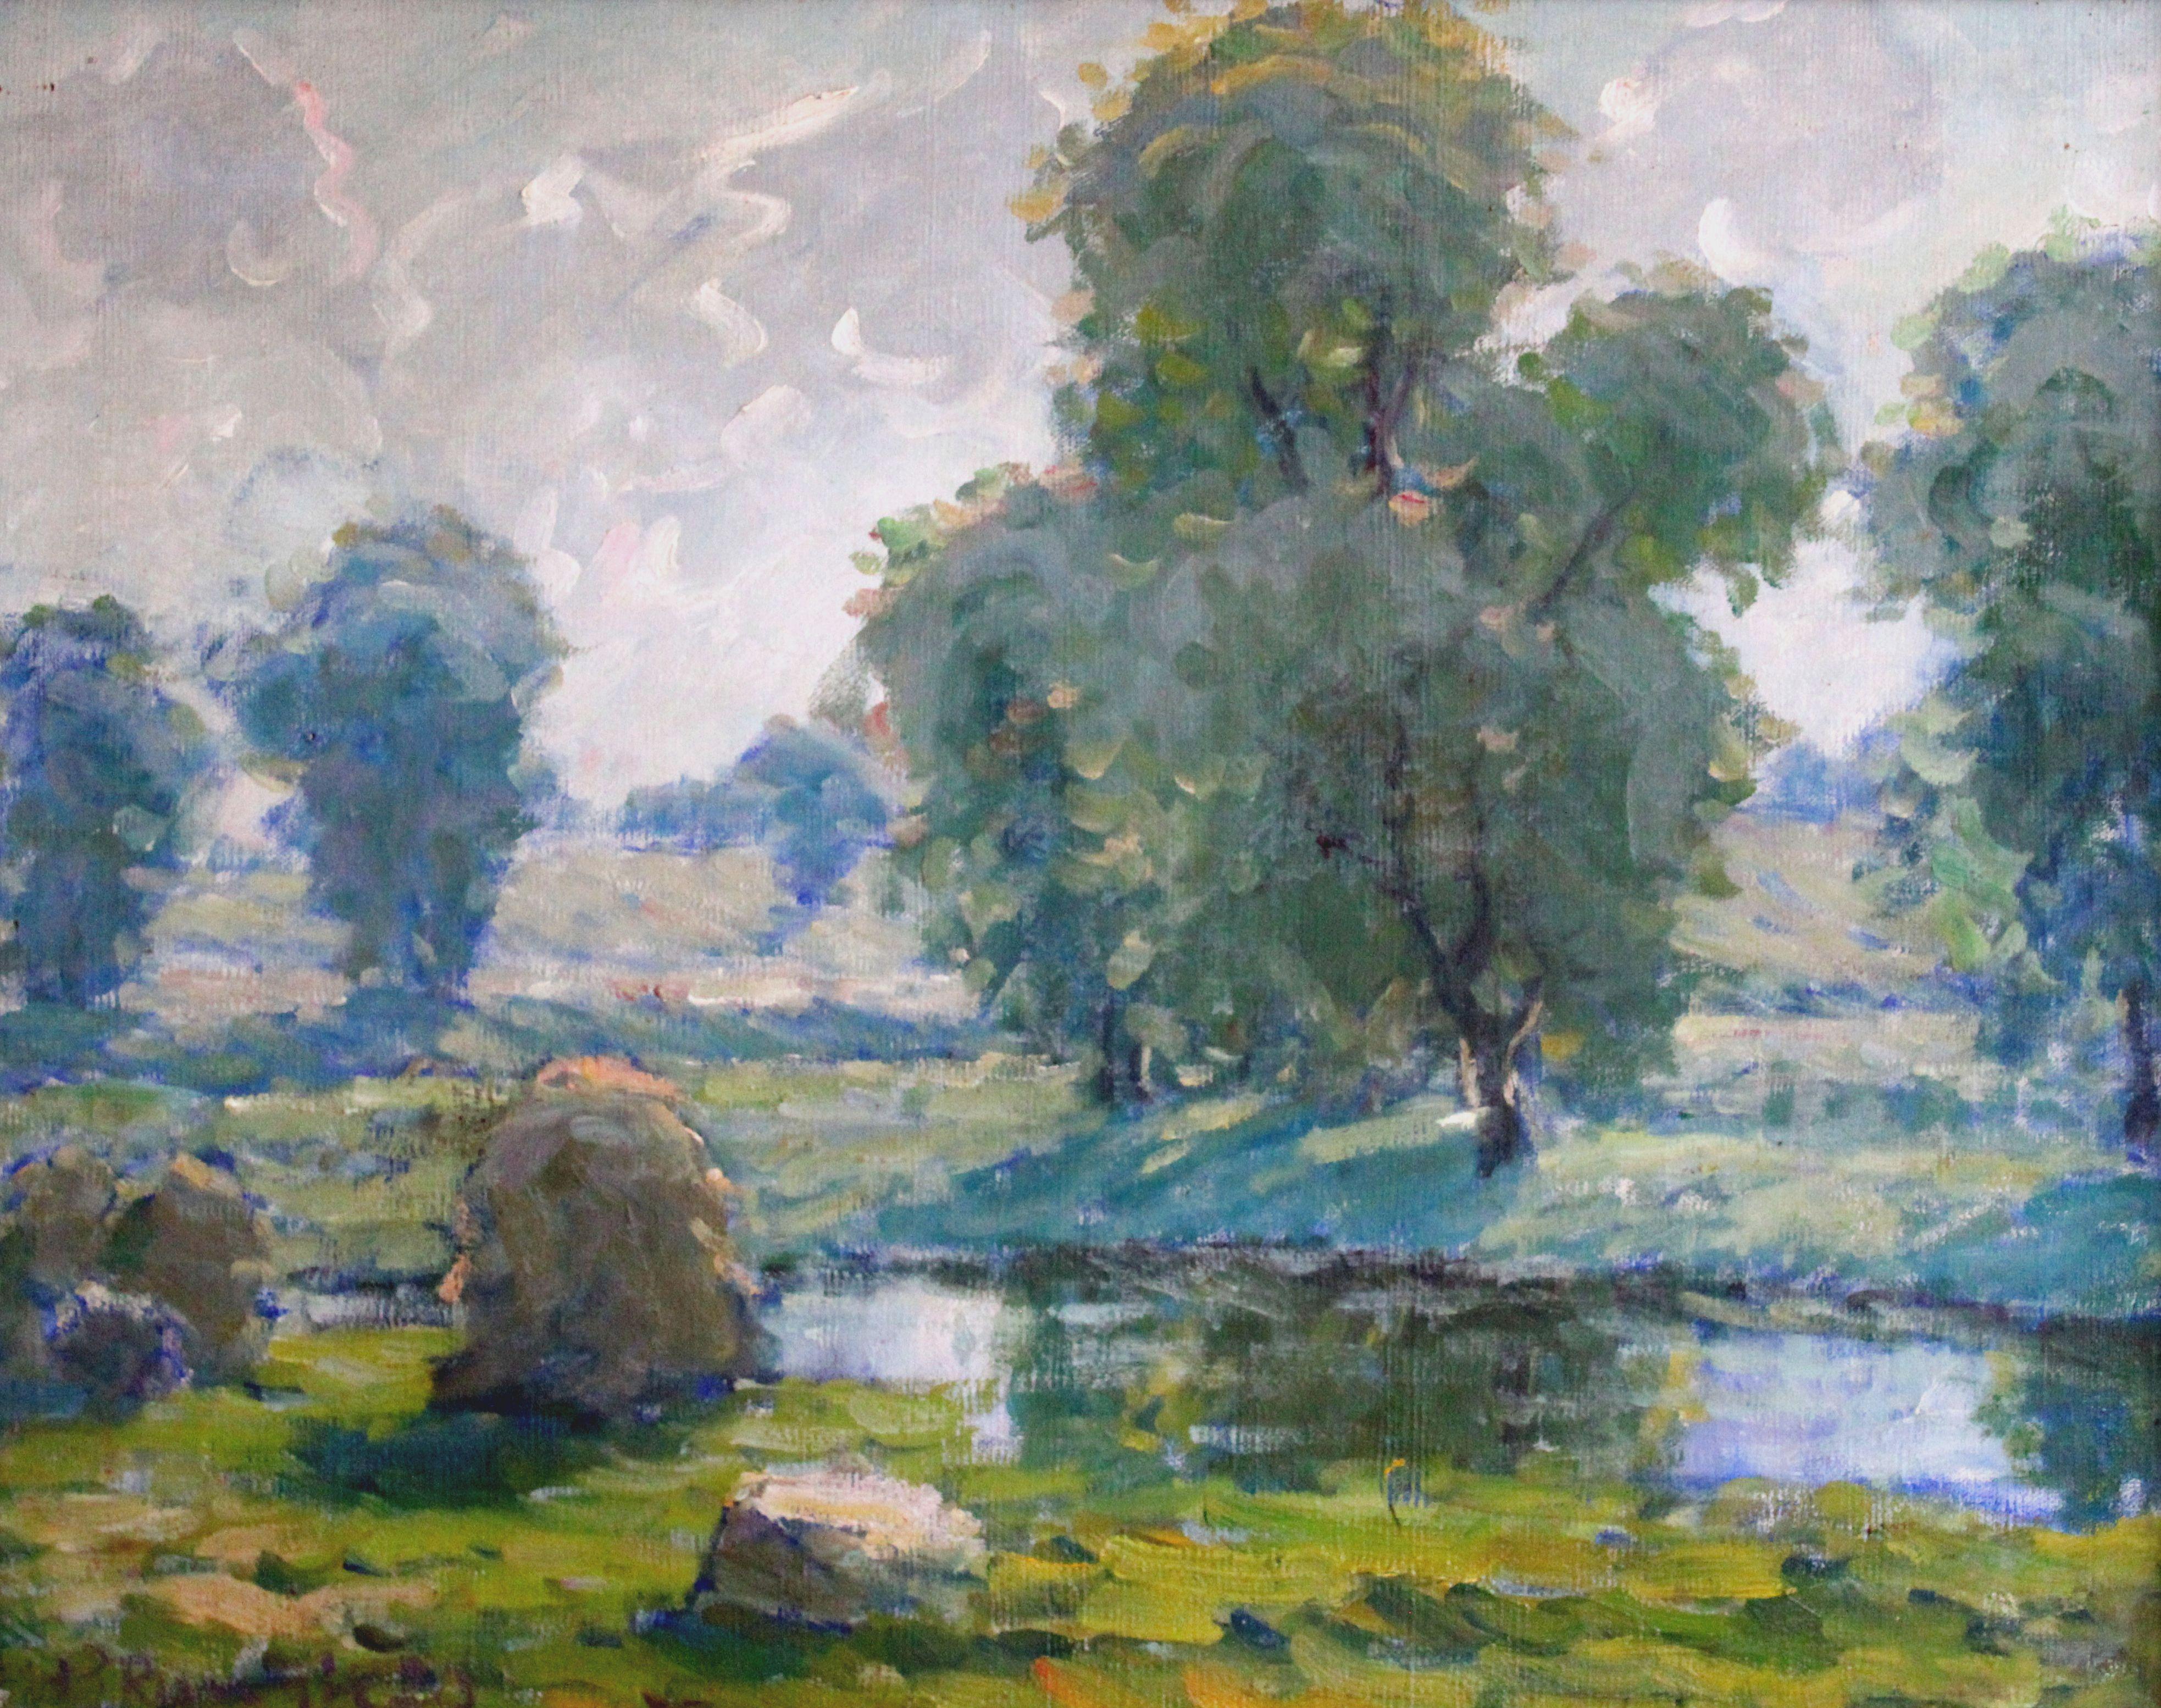 Summer day. Oil on canvas, 69x54 cm